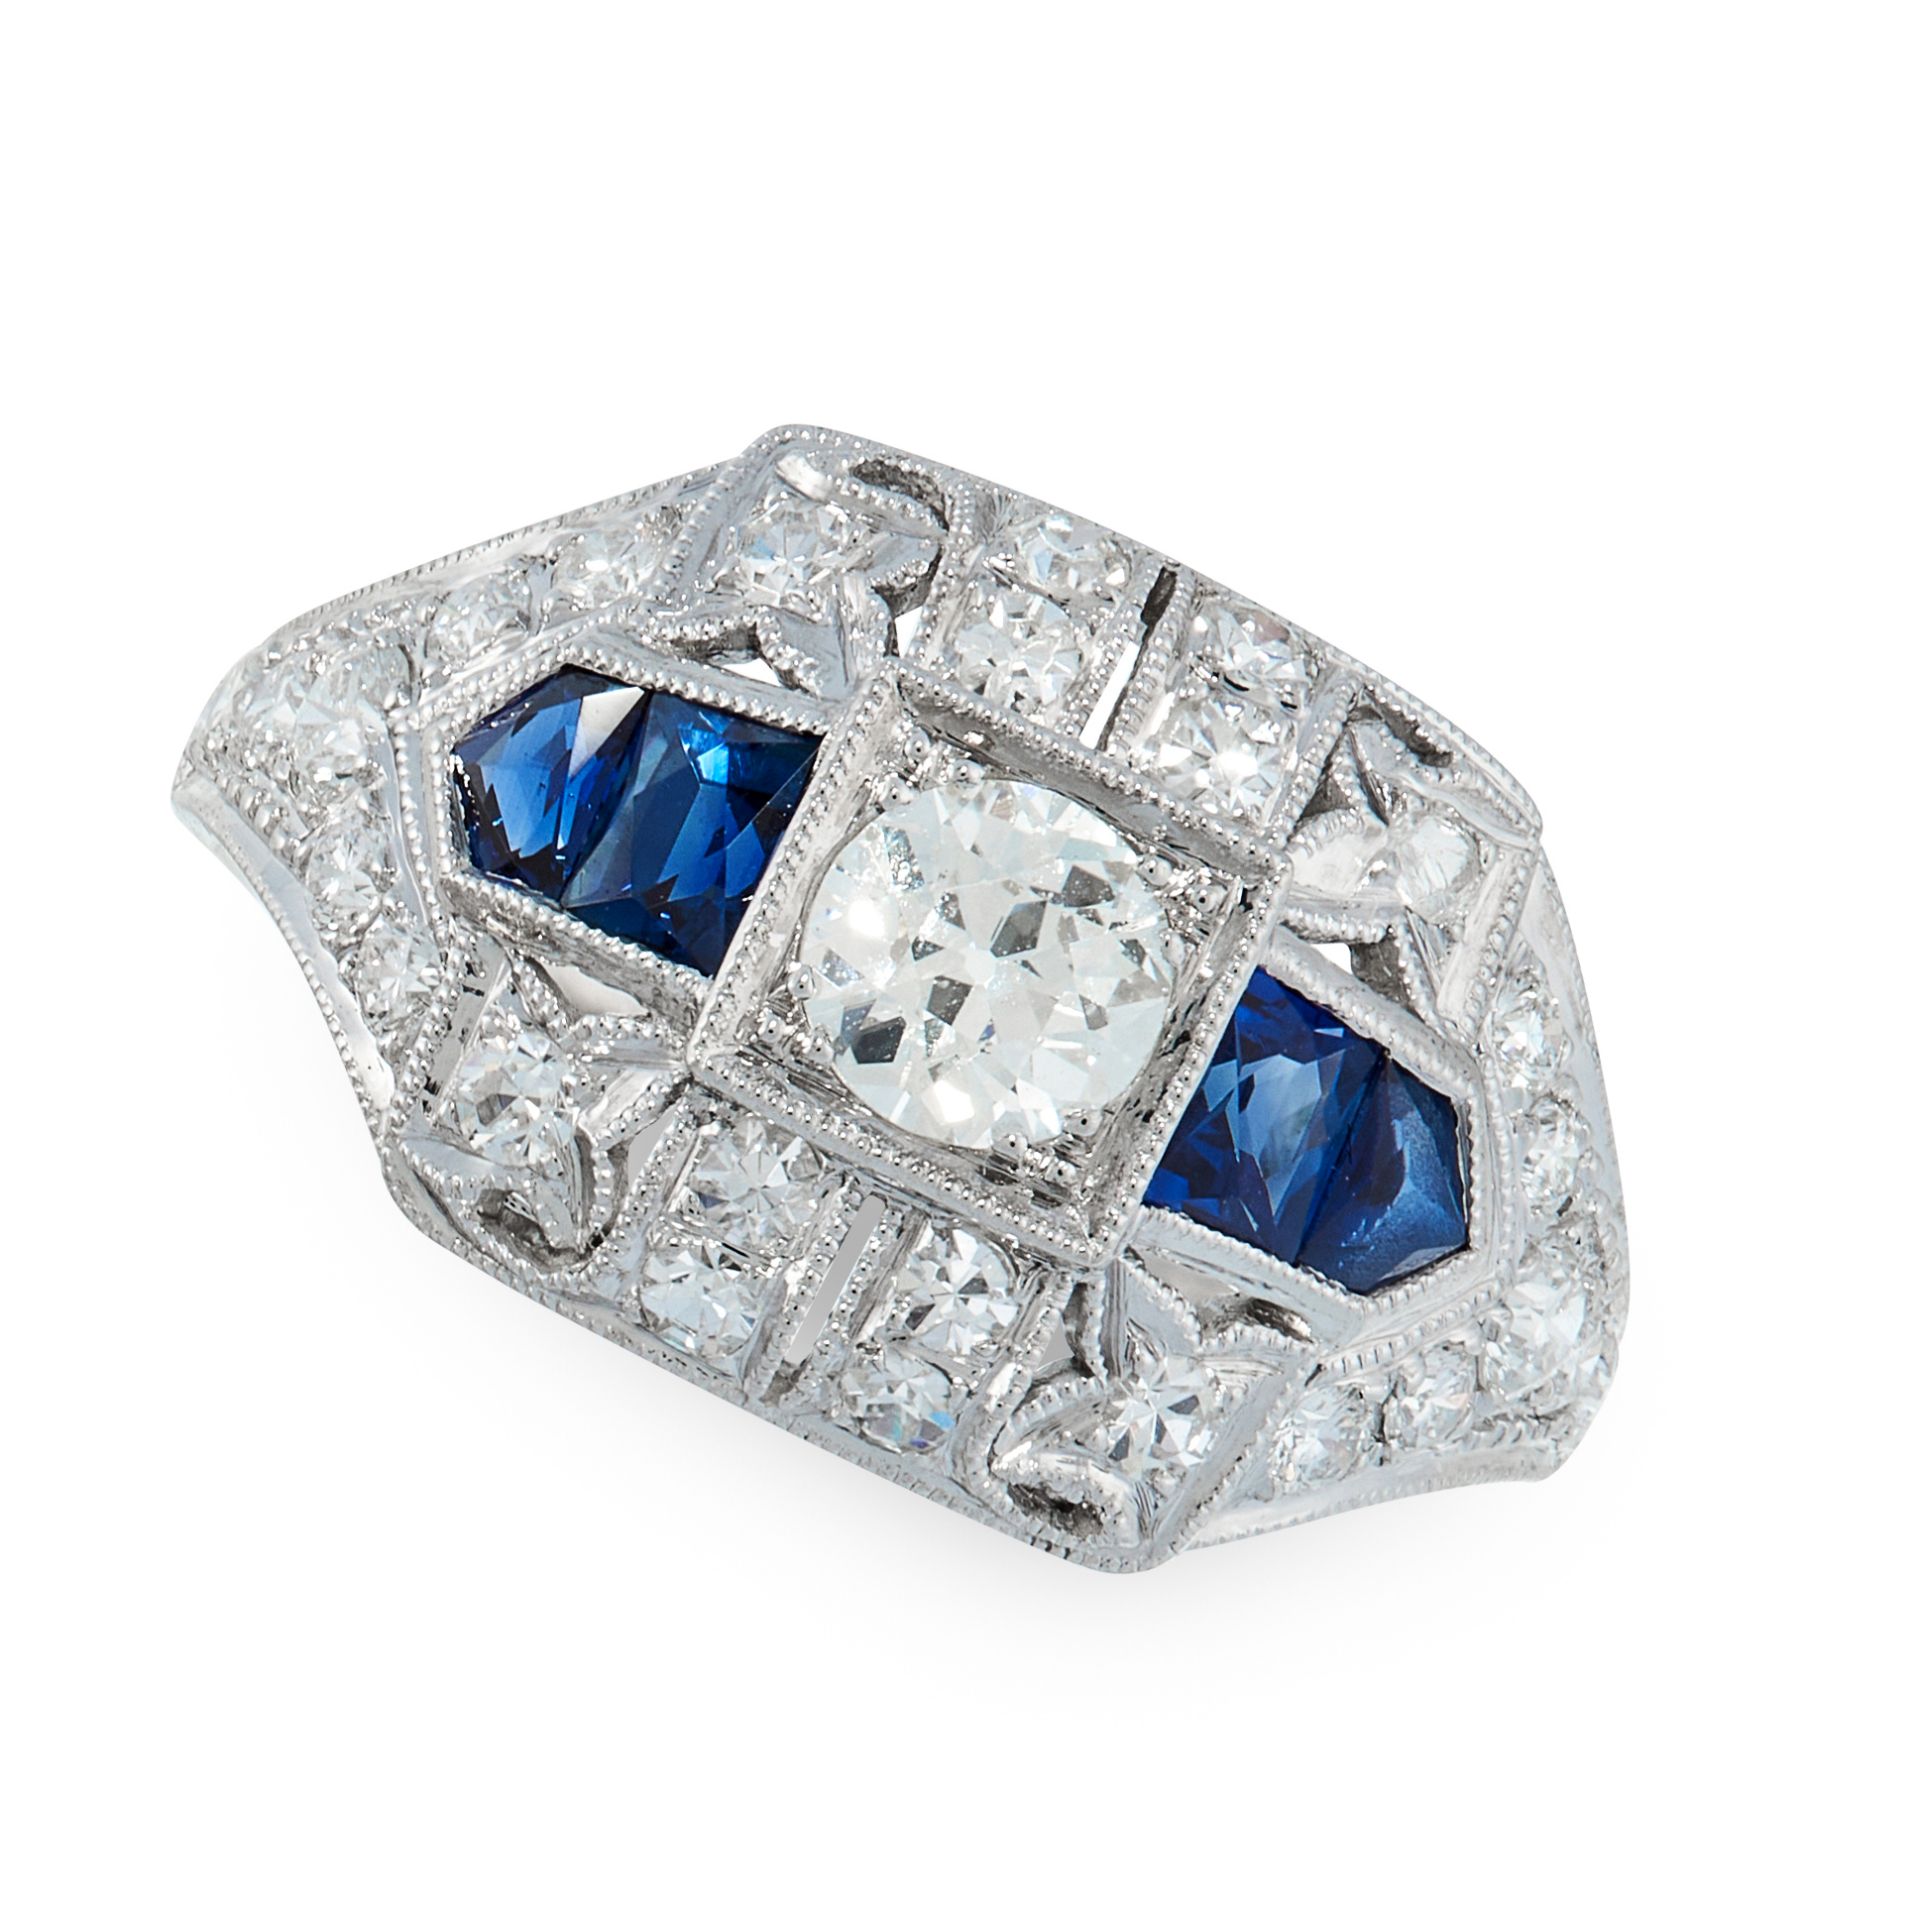 A DIAMOND AND SAPPHIRE DRESS RING, SOPHIA D in platinum, in Art Deco design, set with a central